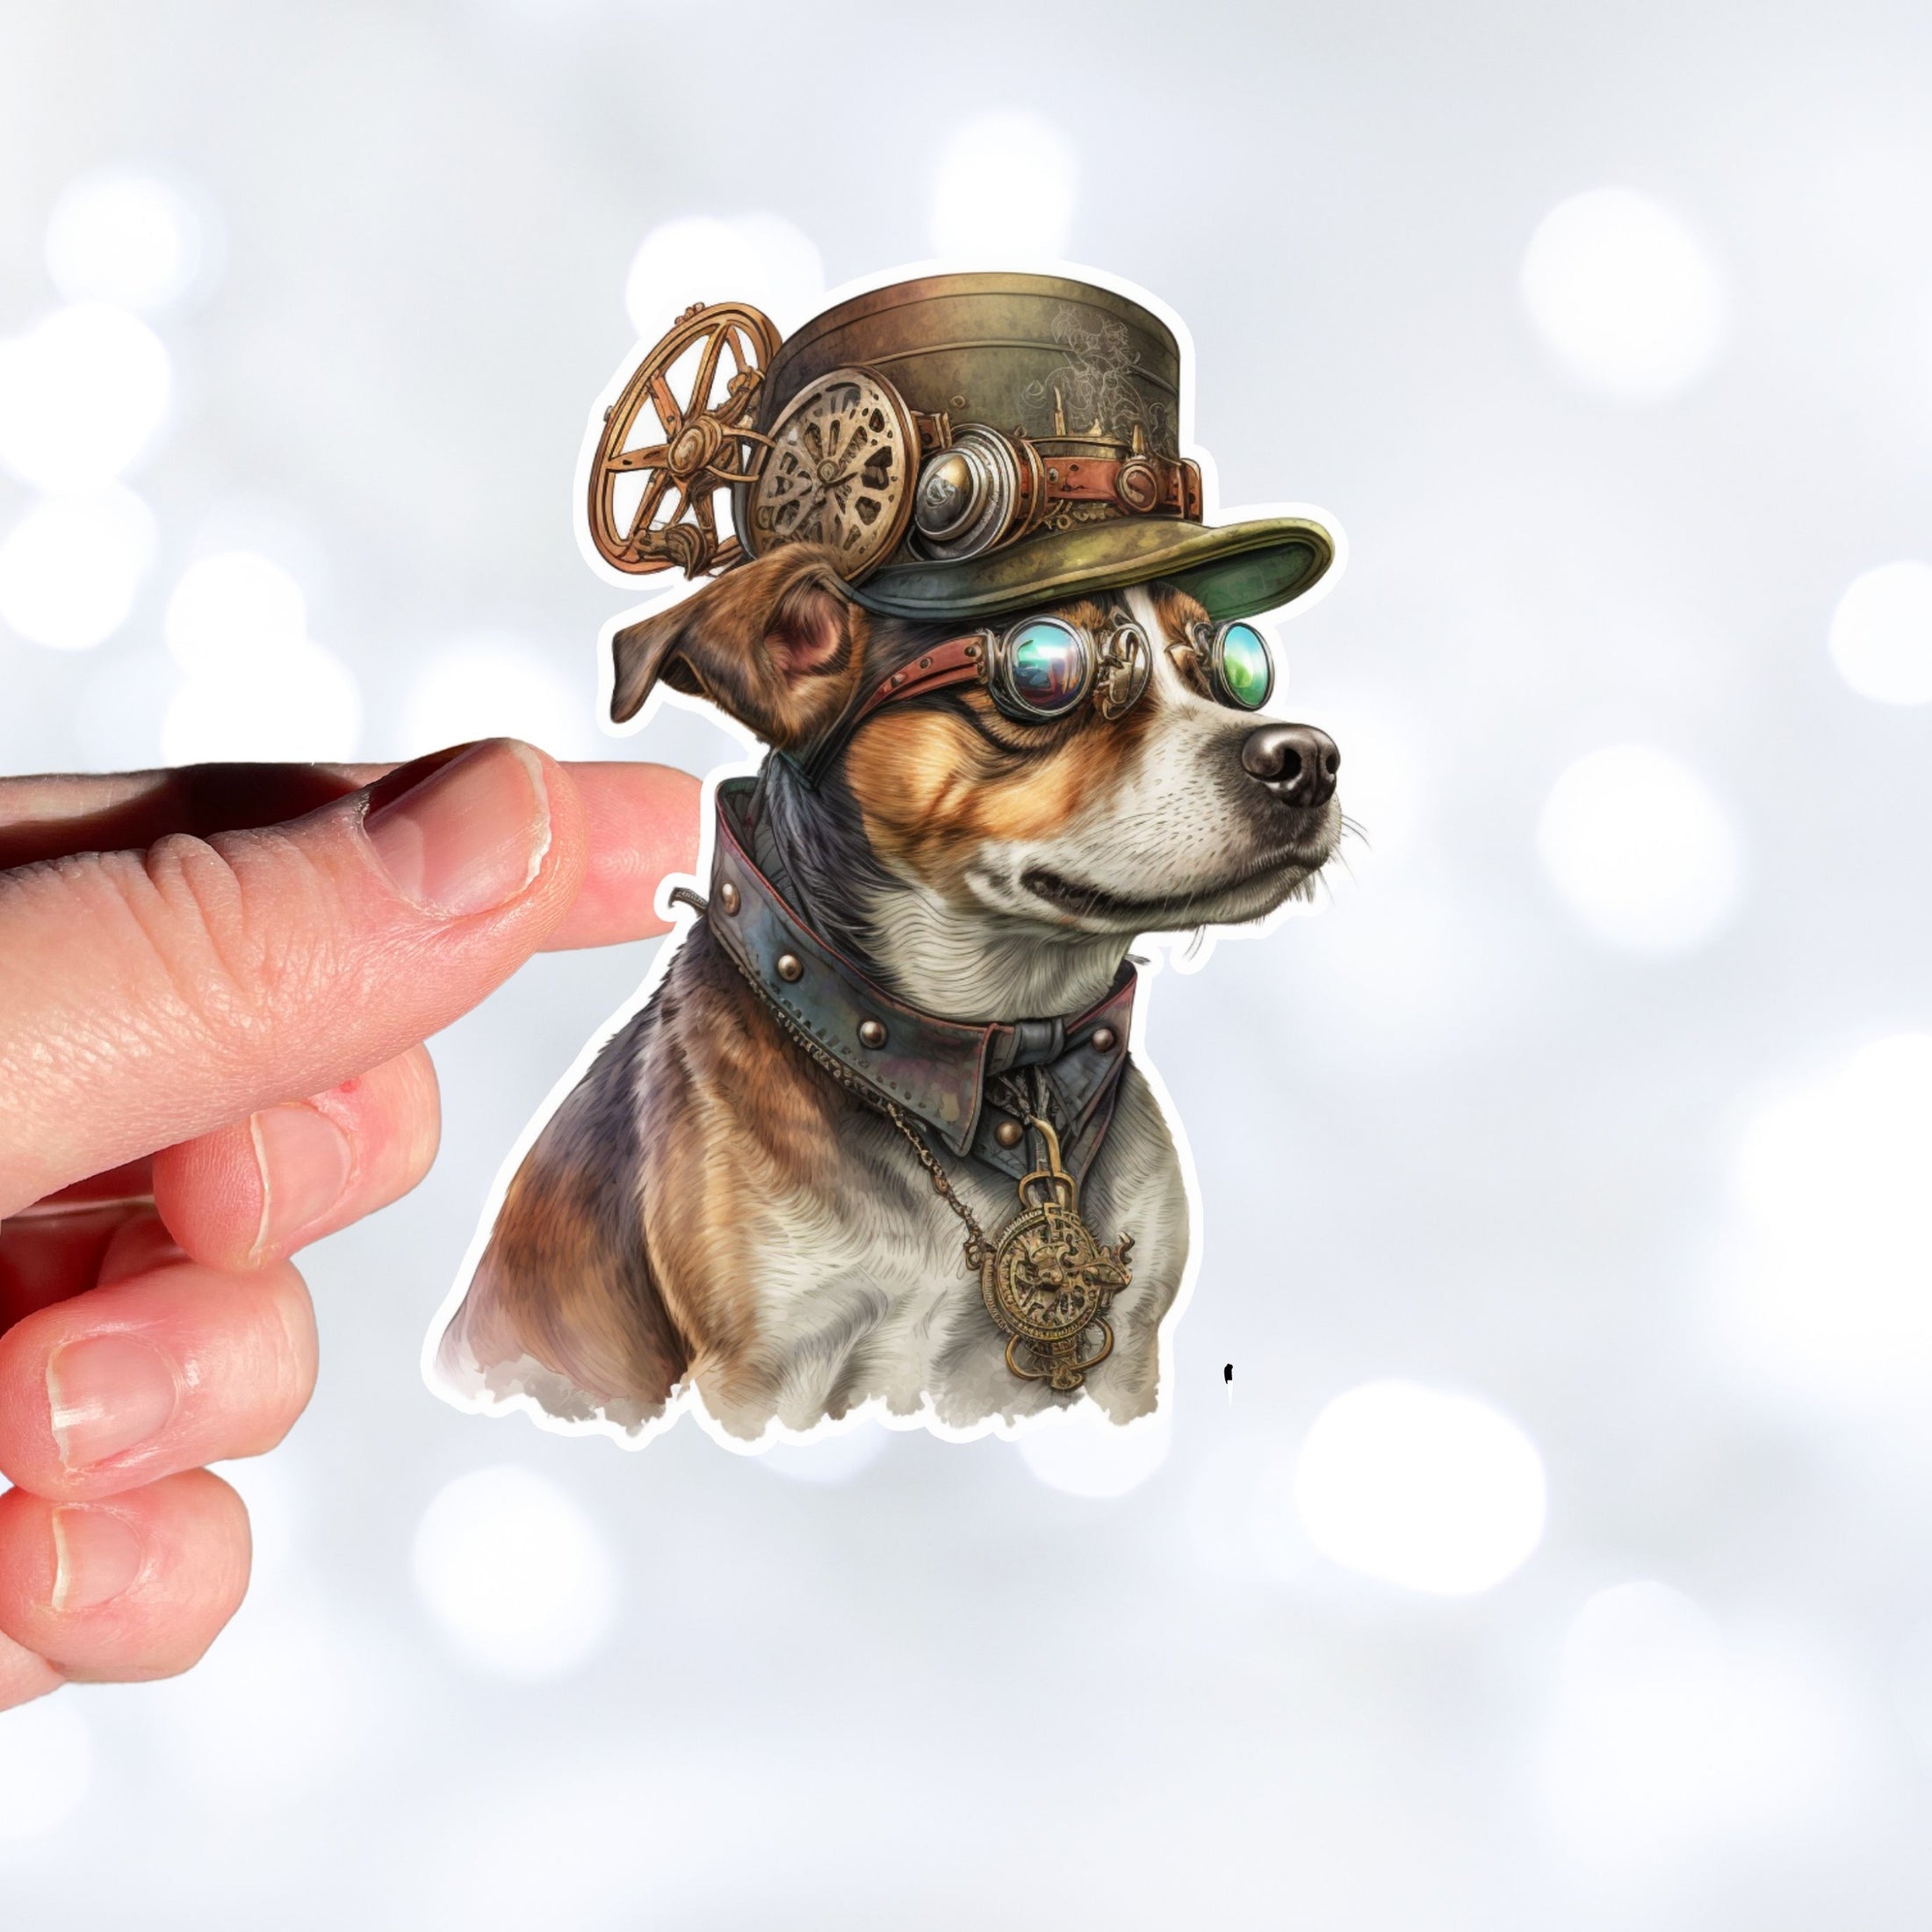 This image shows the steampunk dog sticker being held on a finger.